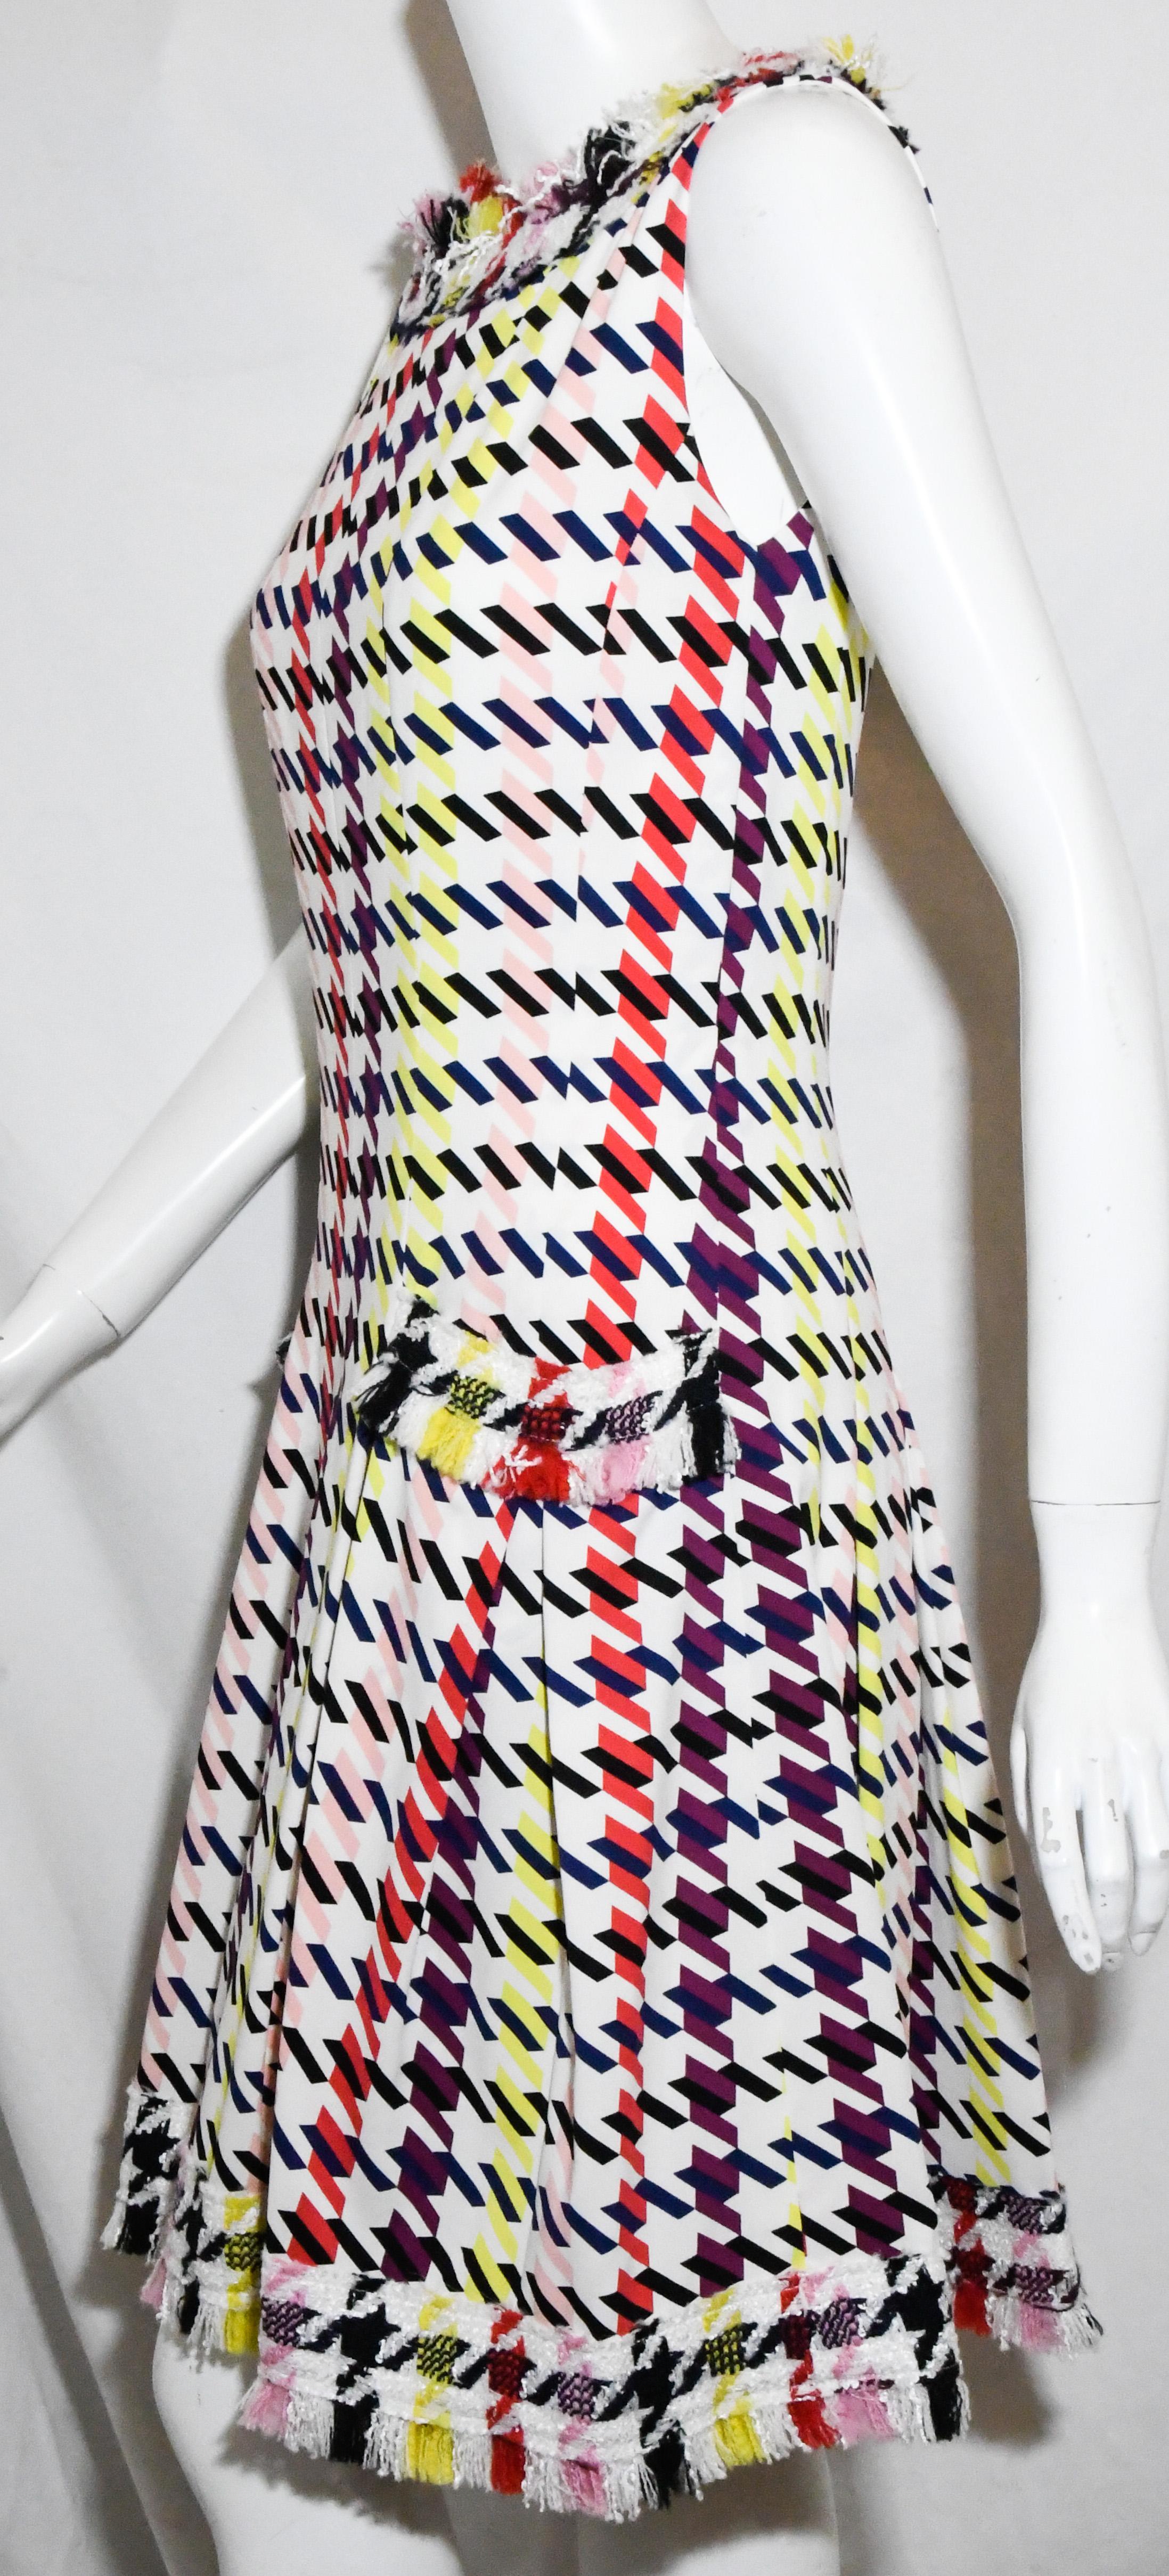 Oscar de la Renta multi color tweed dress includes a striped graphic geometric design.   Finished with structural pleated skirt and multiple layered fringes around the neck, top of pockets and hem in vibrant colors.   This sleeveless dress contained